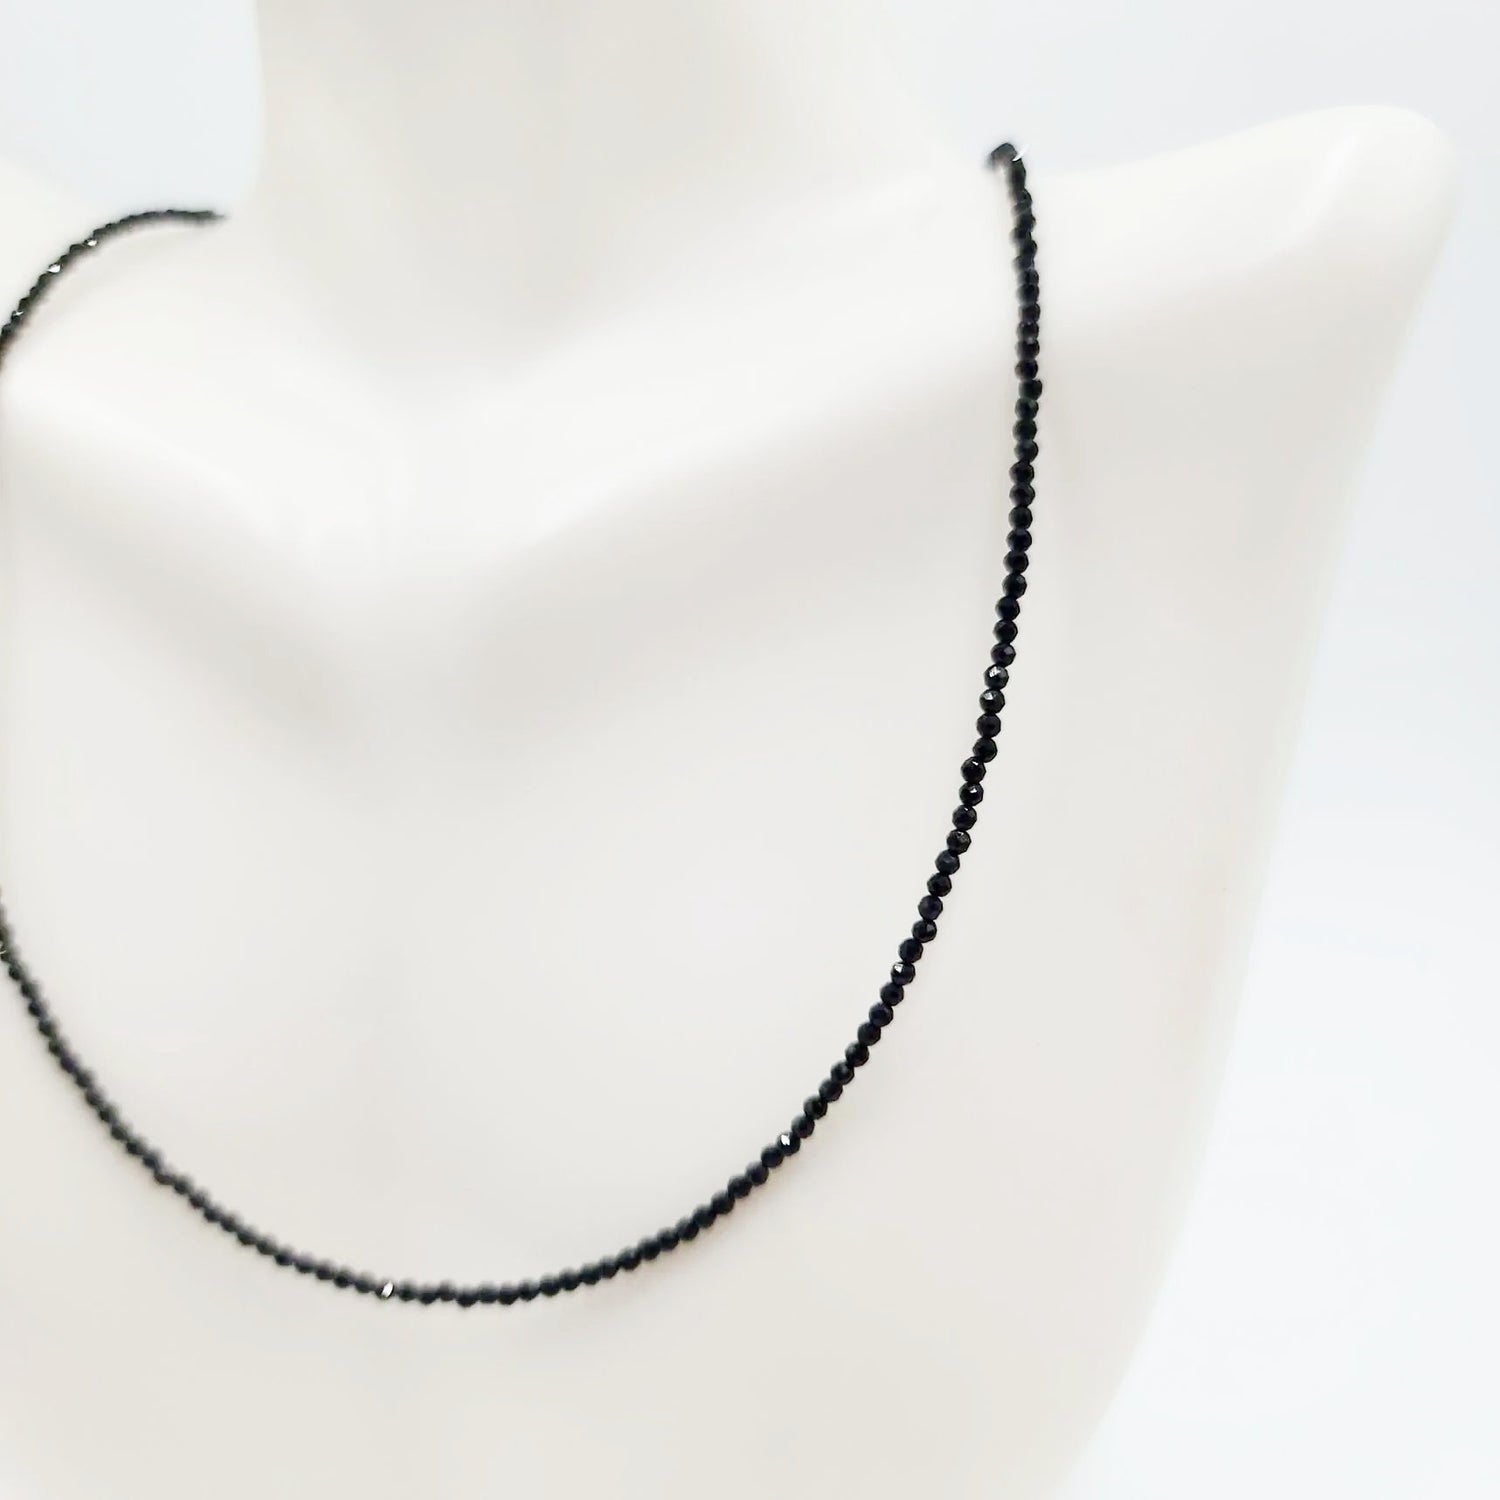 Black Tourmaline Necklace 2mm Bead Neck Chain - Elevated Metaphysical